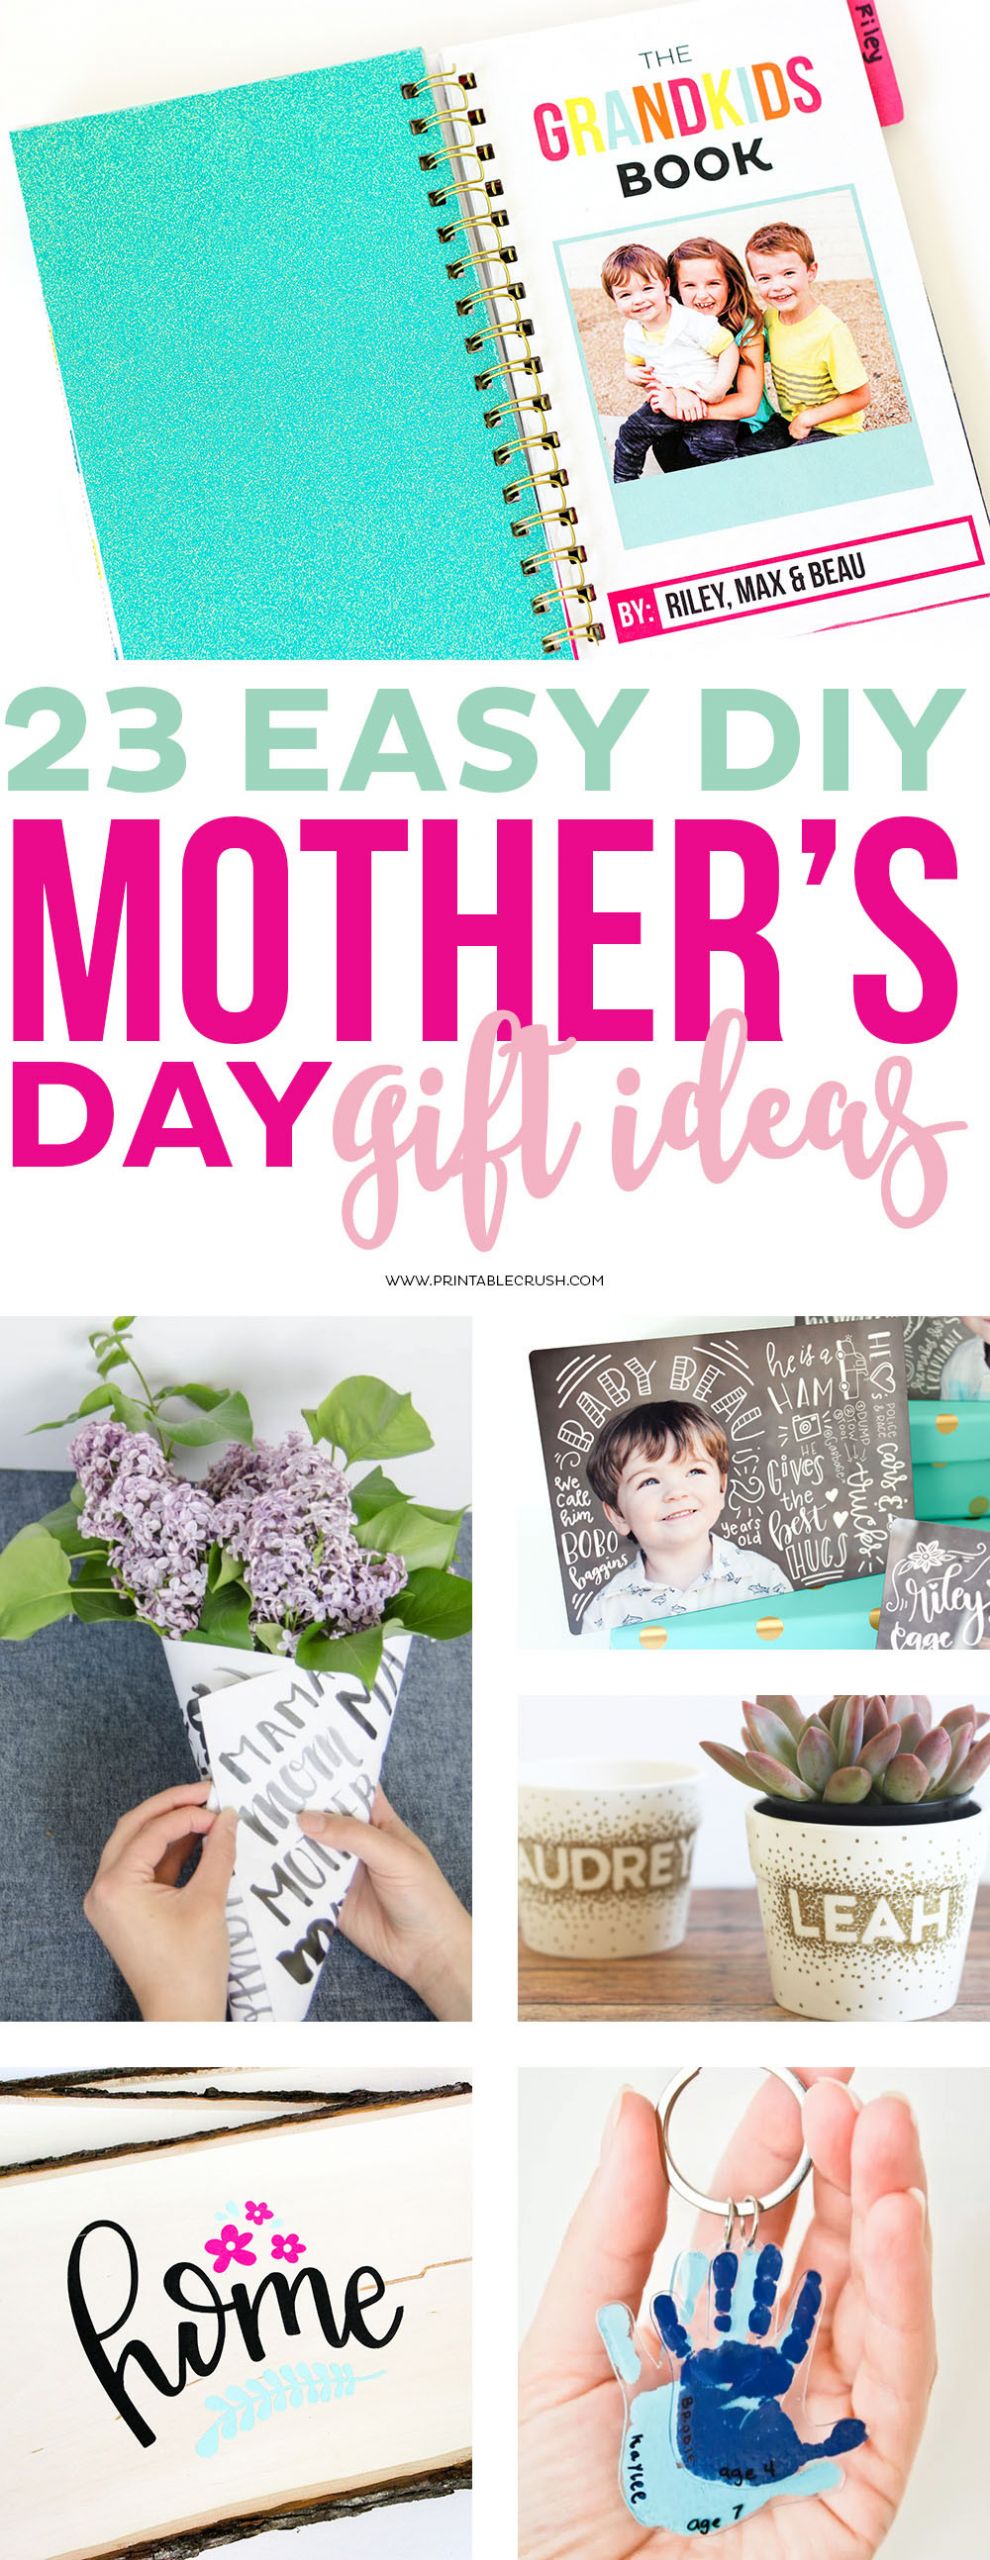 Quick And Easy Mother's Day Gifts
 23 Easy DIY Mother s Day Gift Ideas Printable Crush